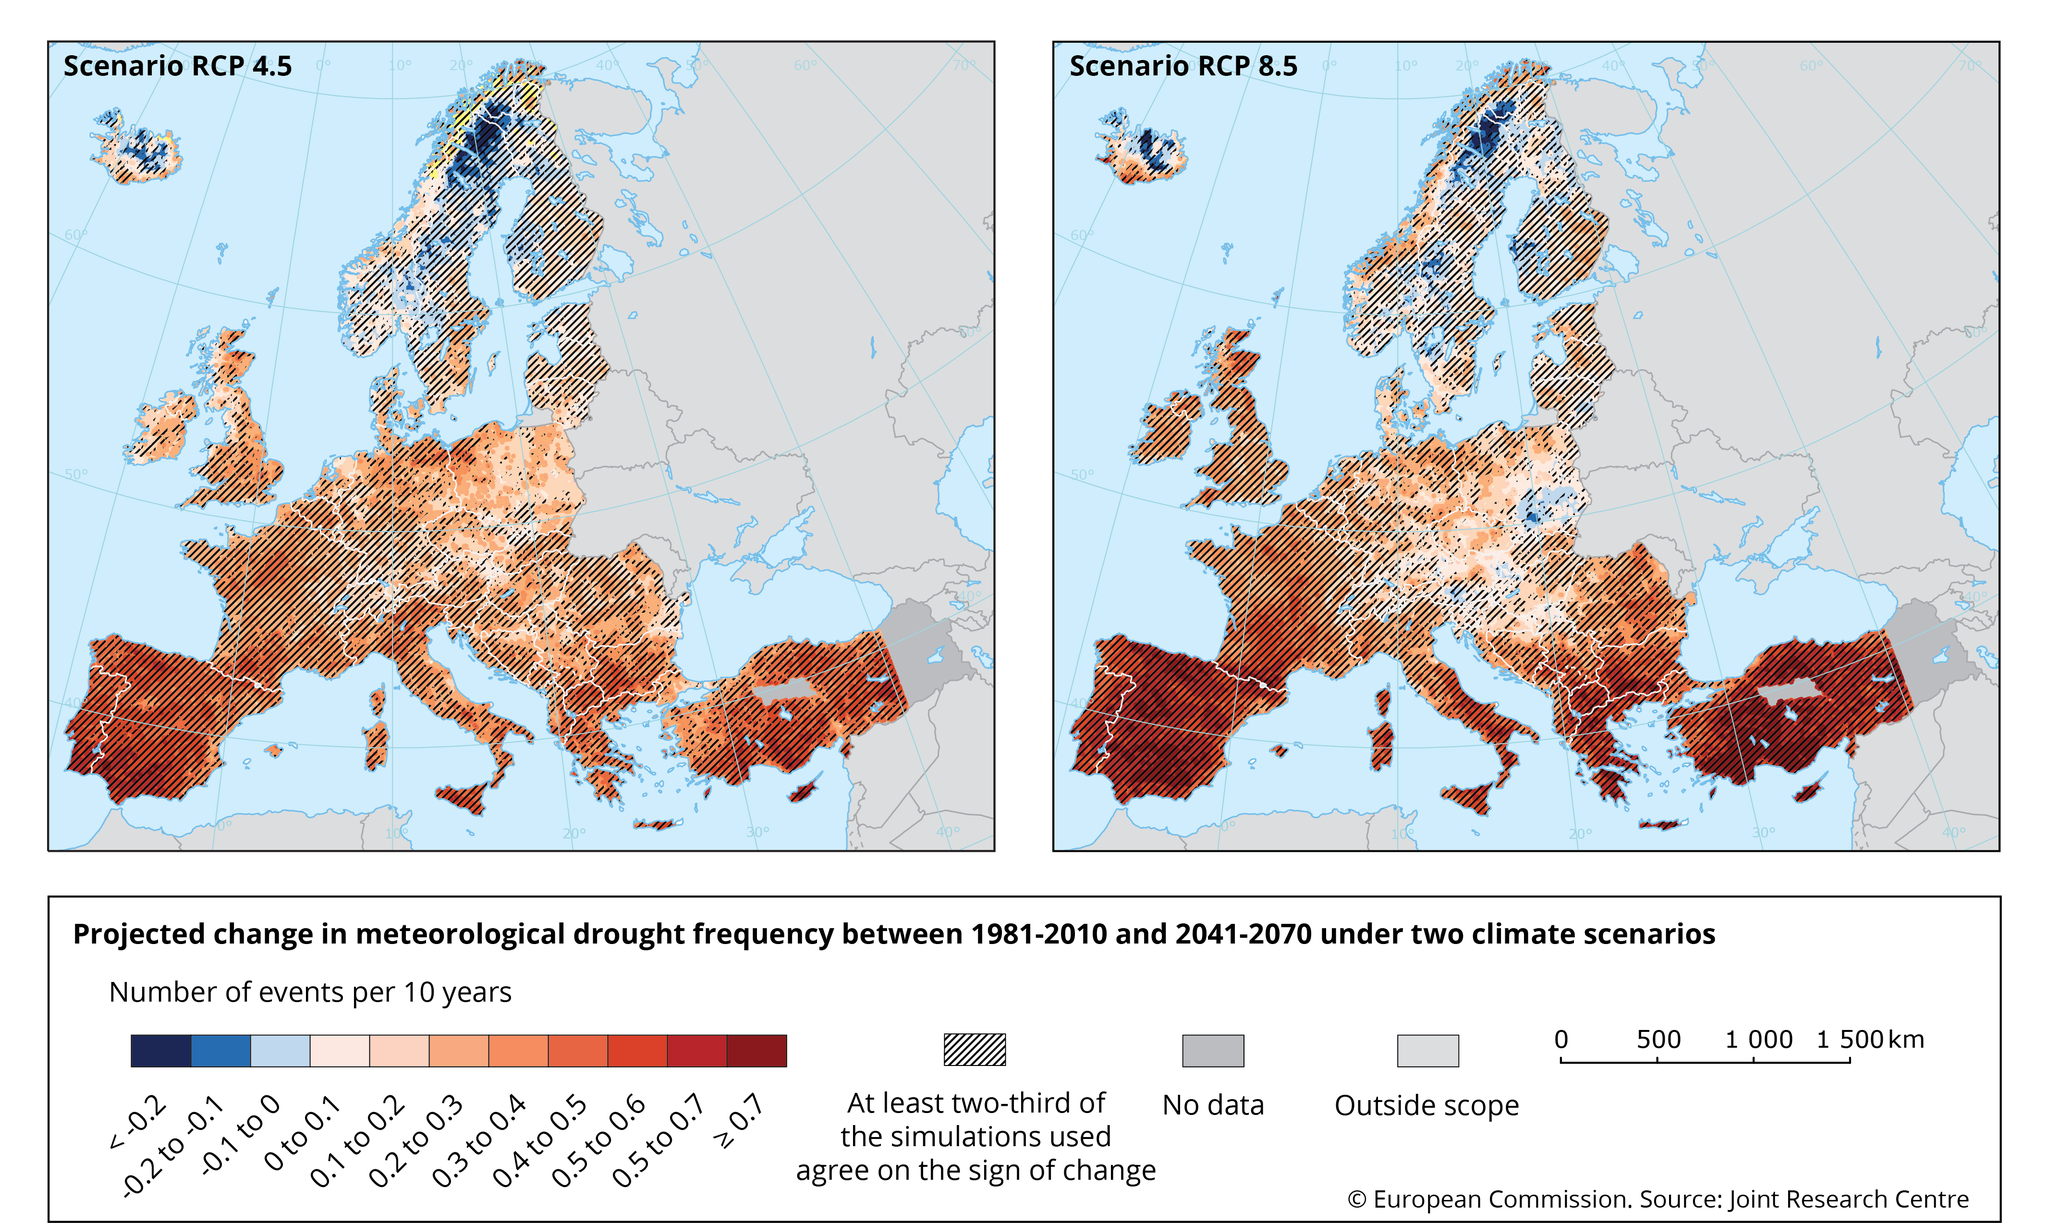 Projected change in meteorological drought frequency between the present (1981-2010) and the mid-century 21st century (2041-2070) in Europe, under two emissions scenarios